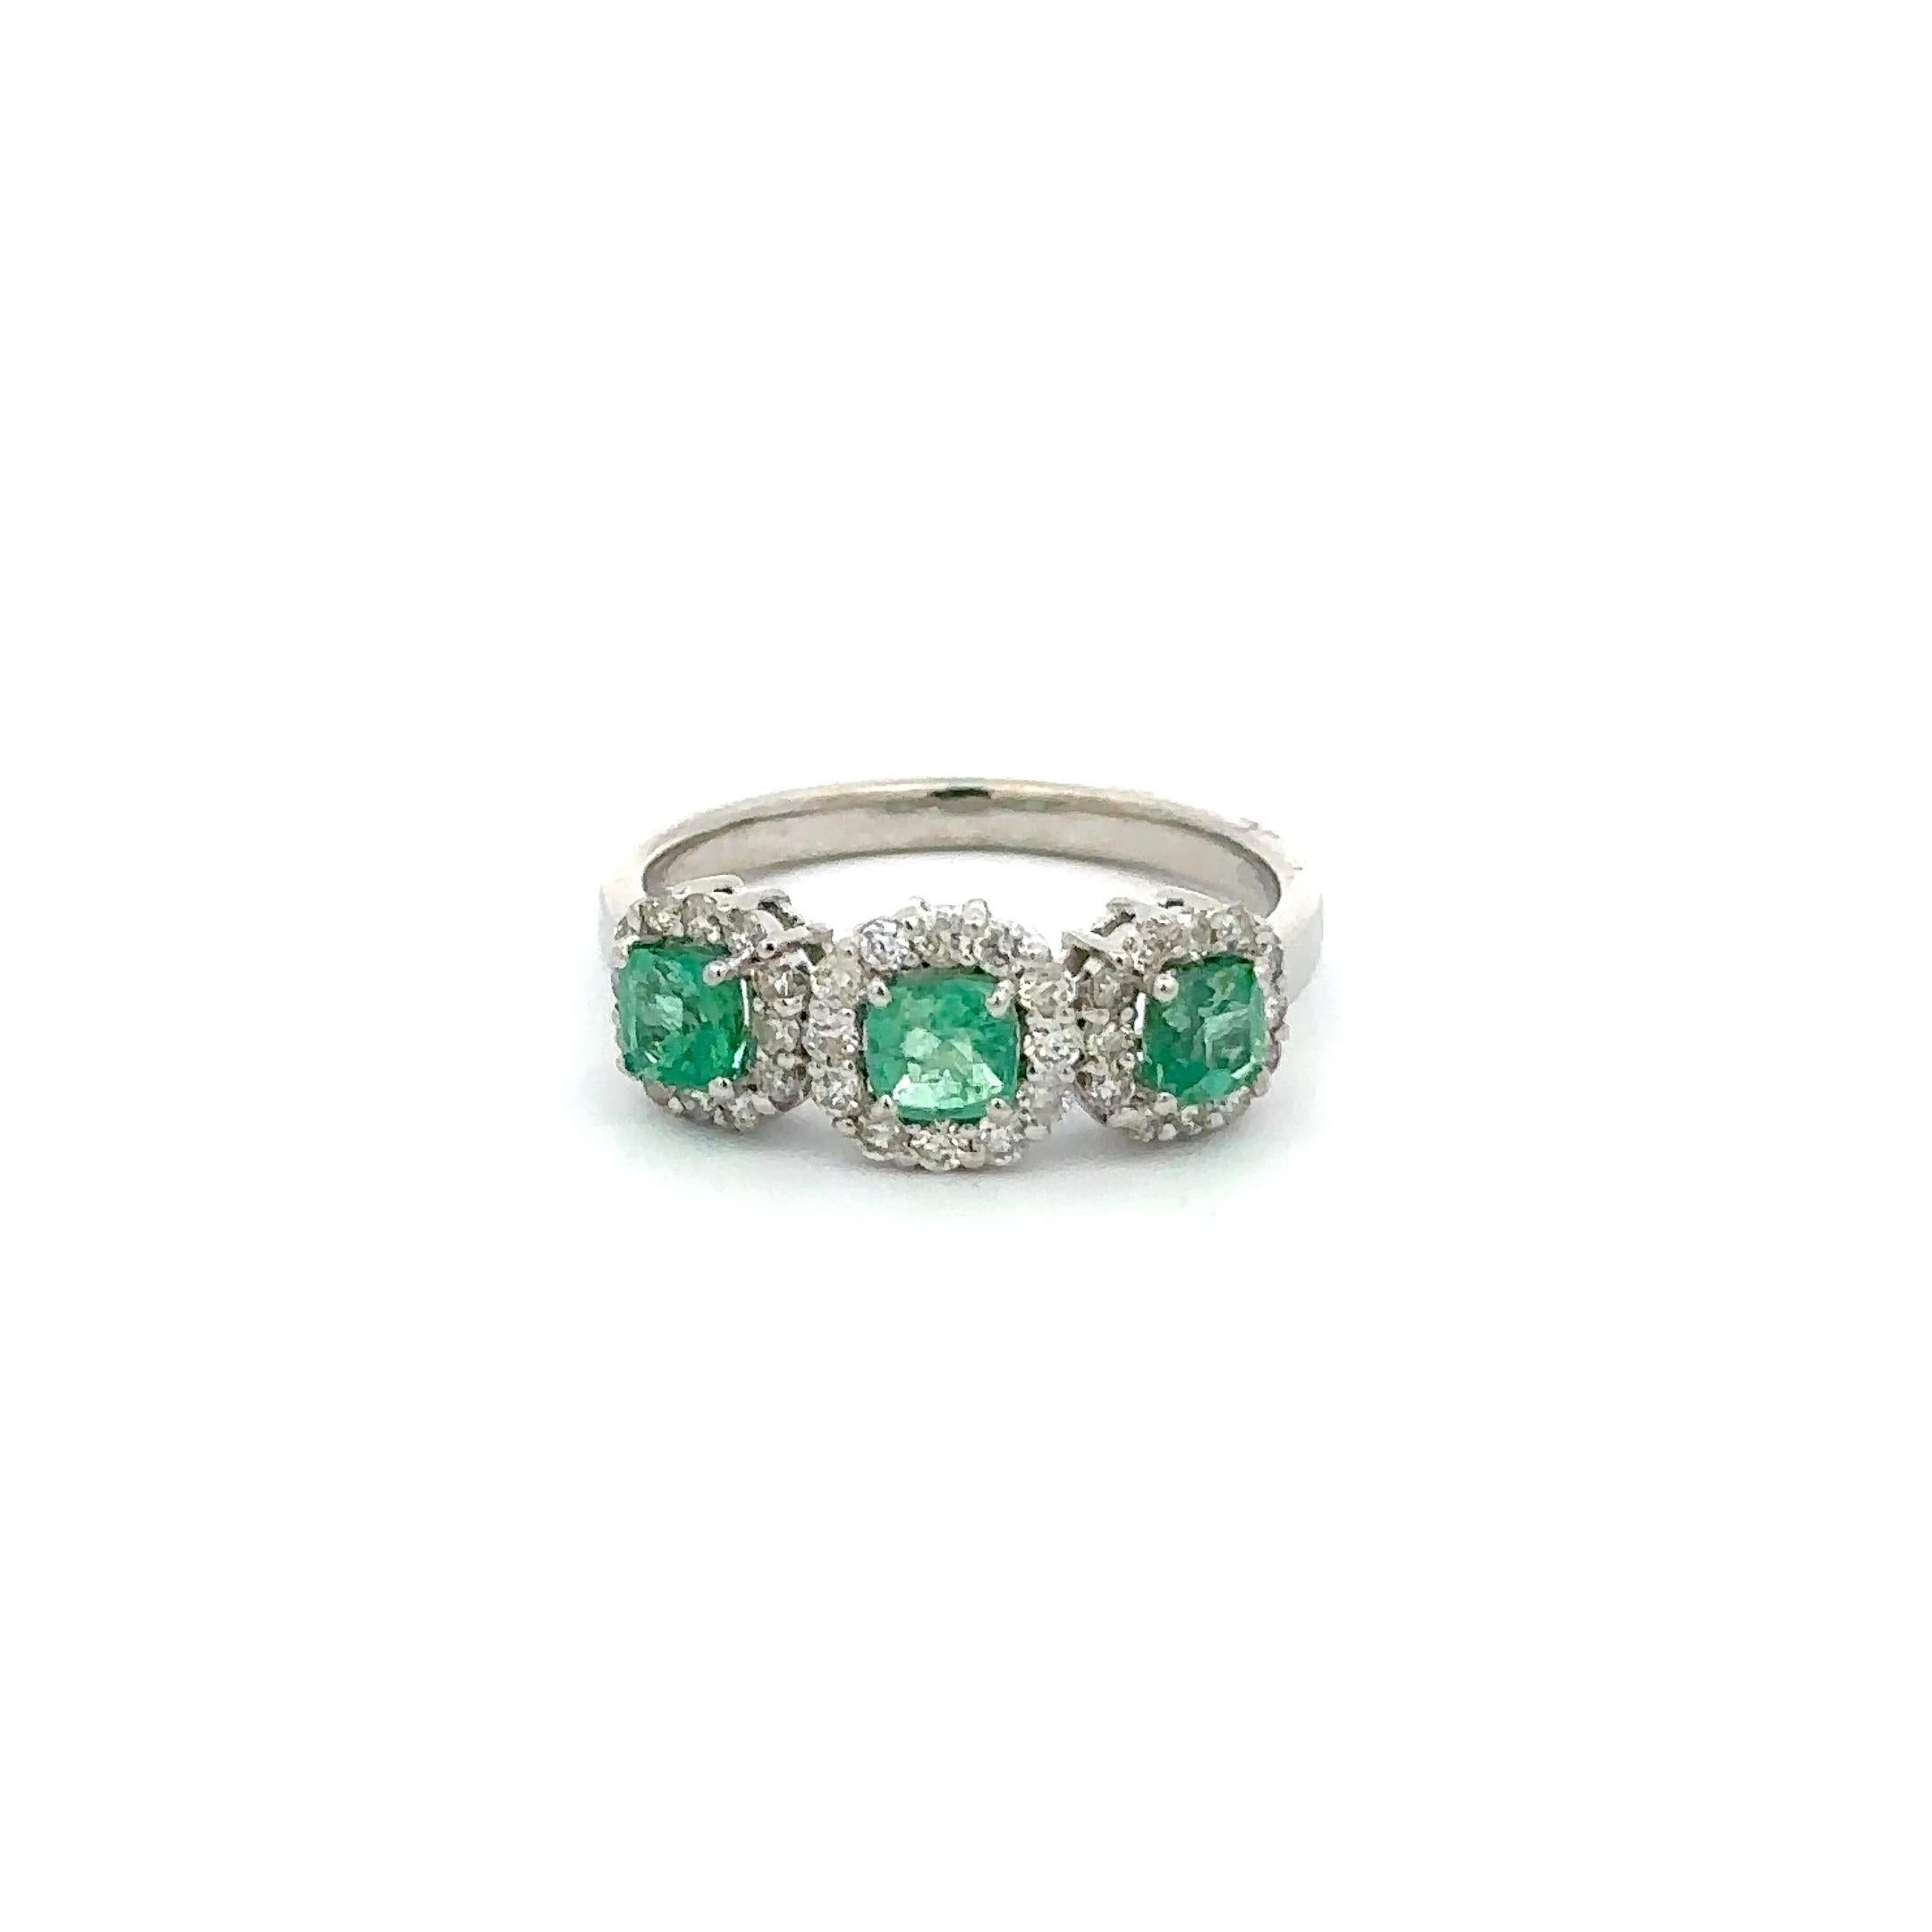 For Sale:  Halo Diamond Emerald Three Stone Ring in 14k Solid White Gold Settings 8